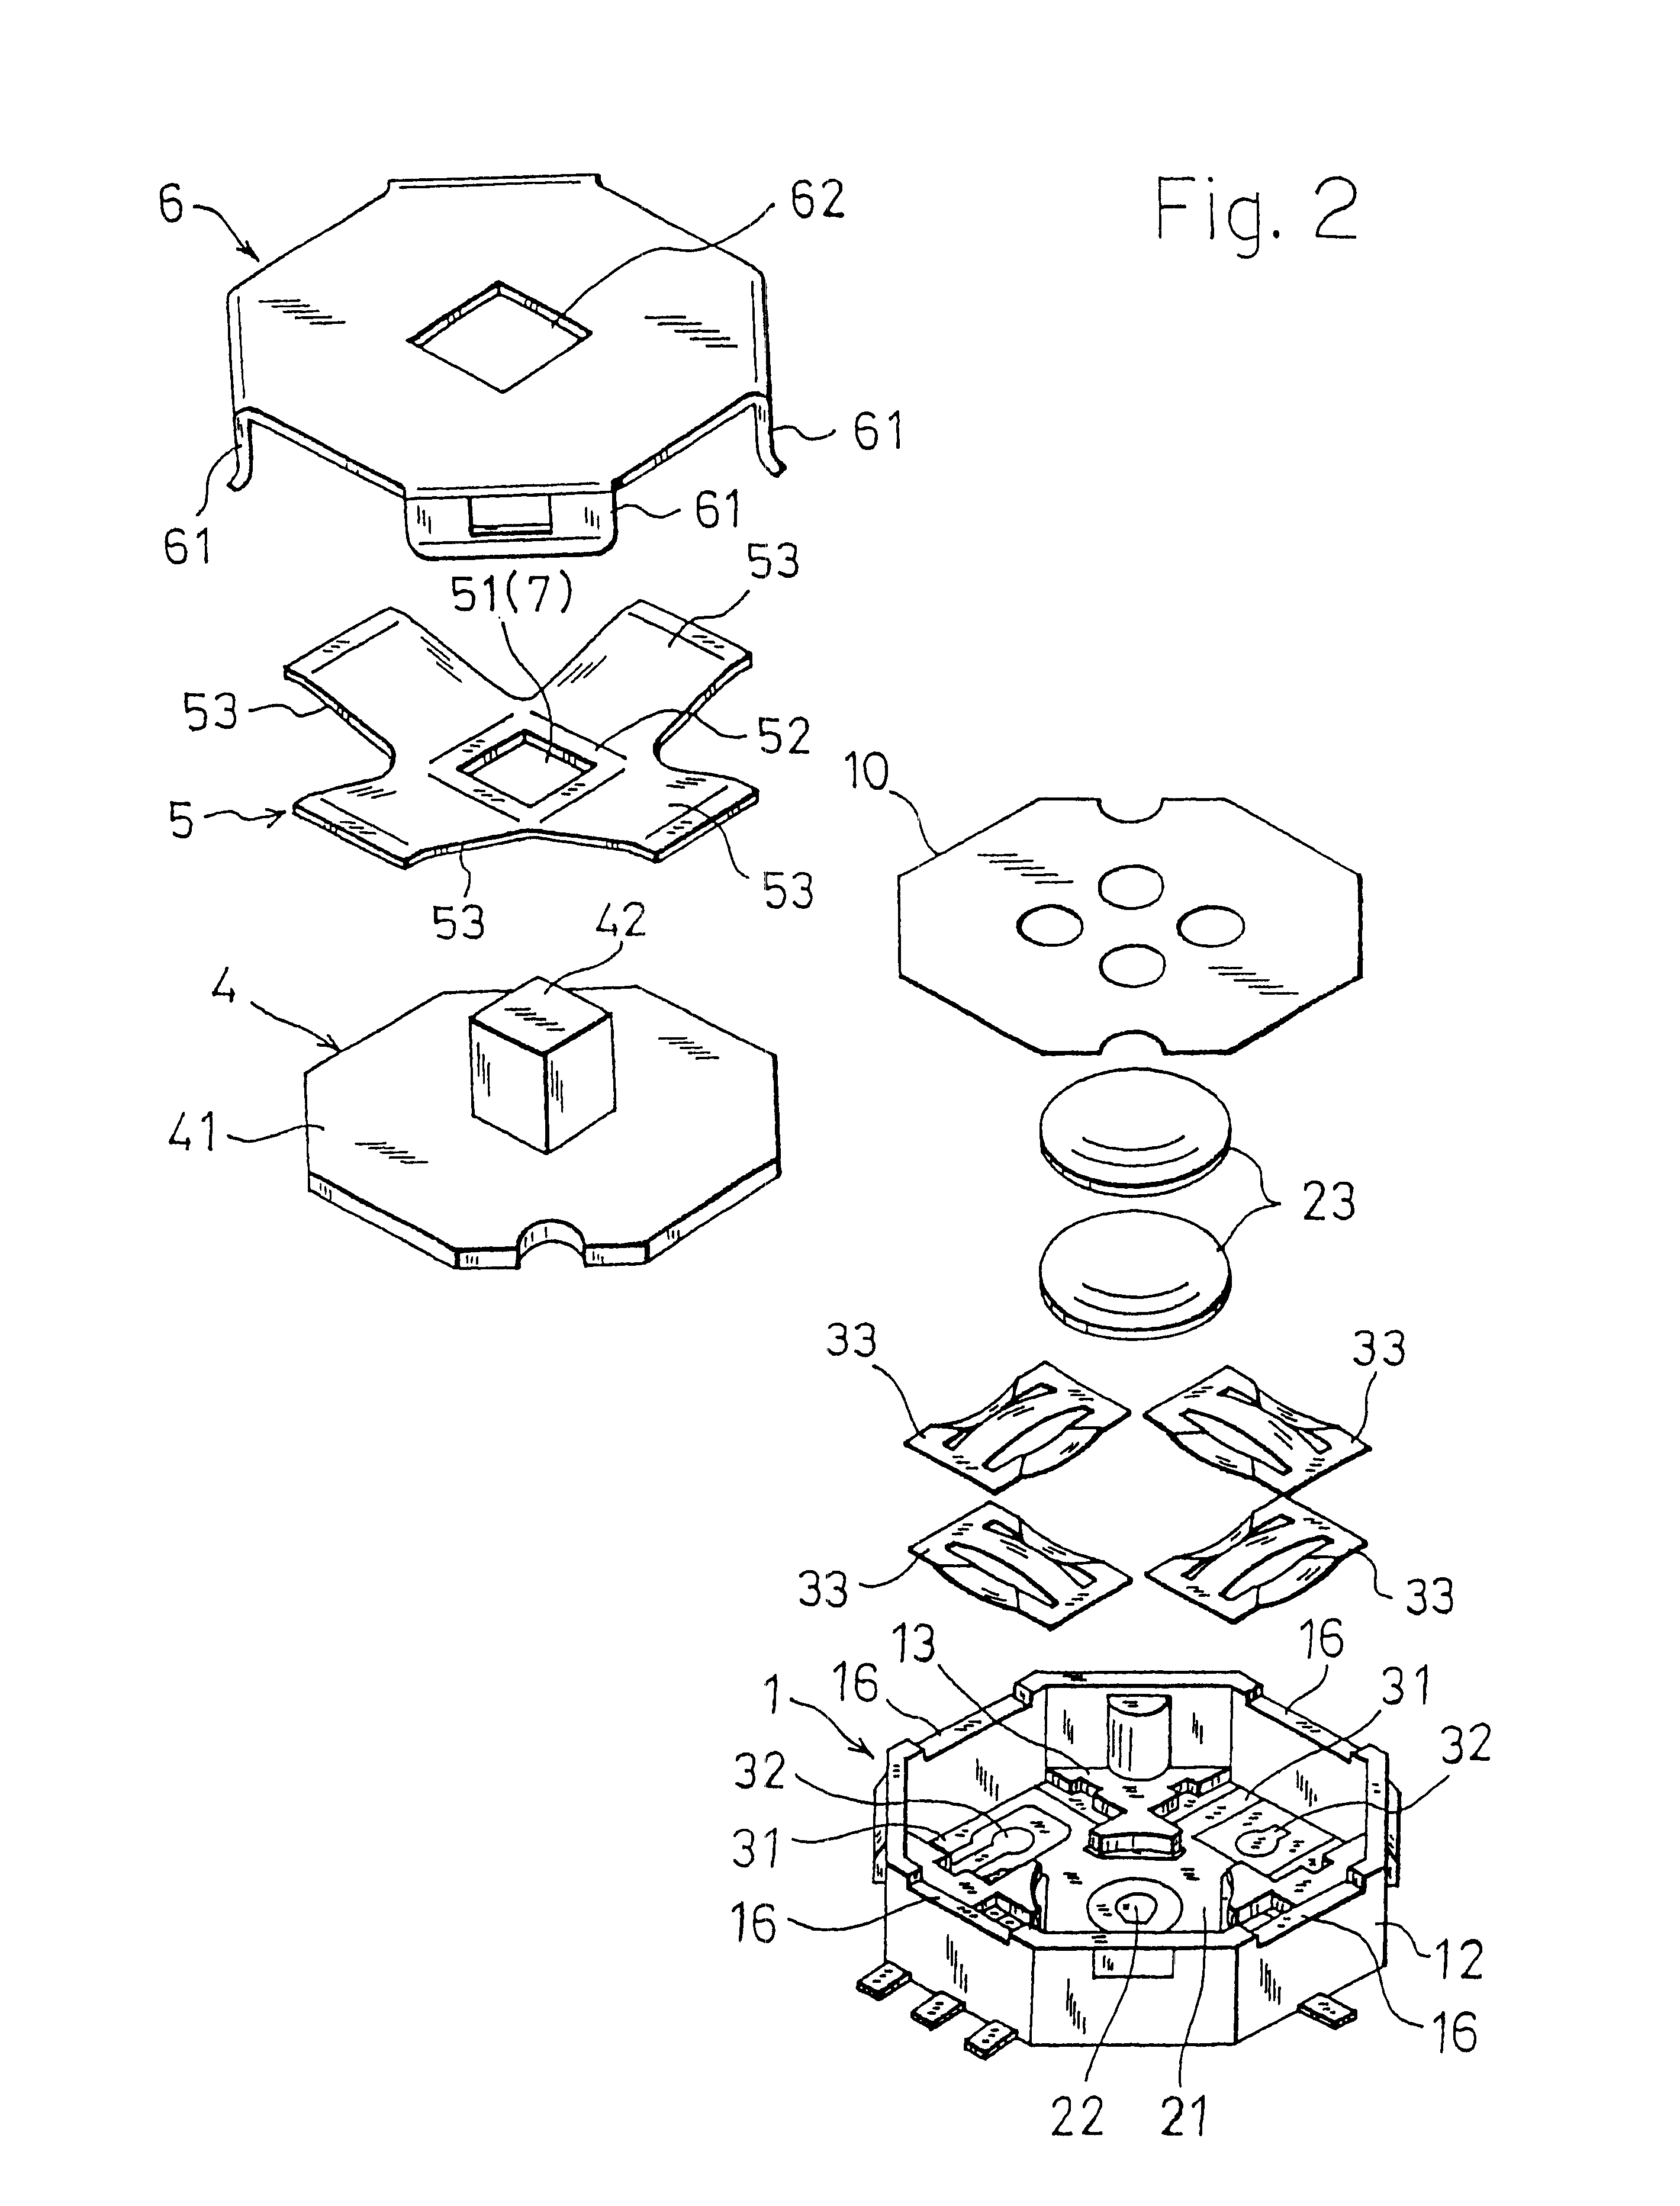 Multiple contact input device